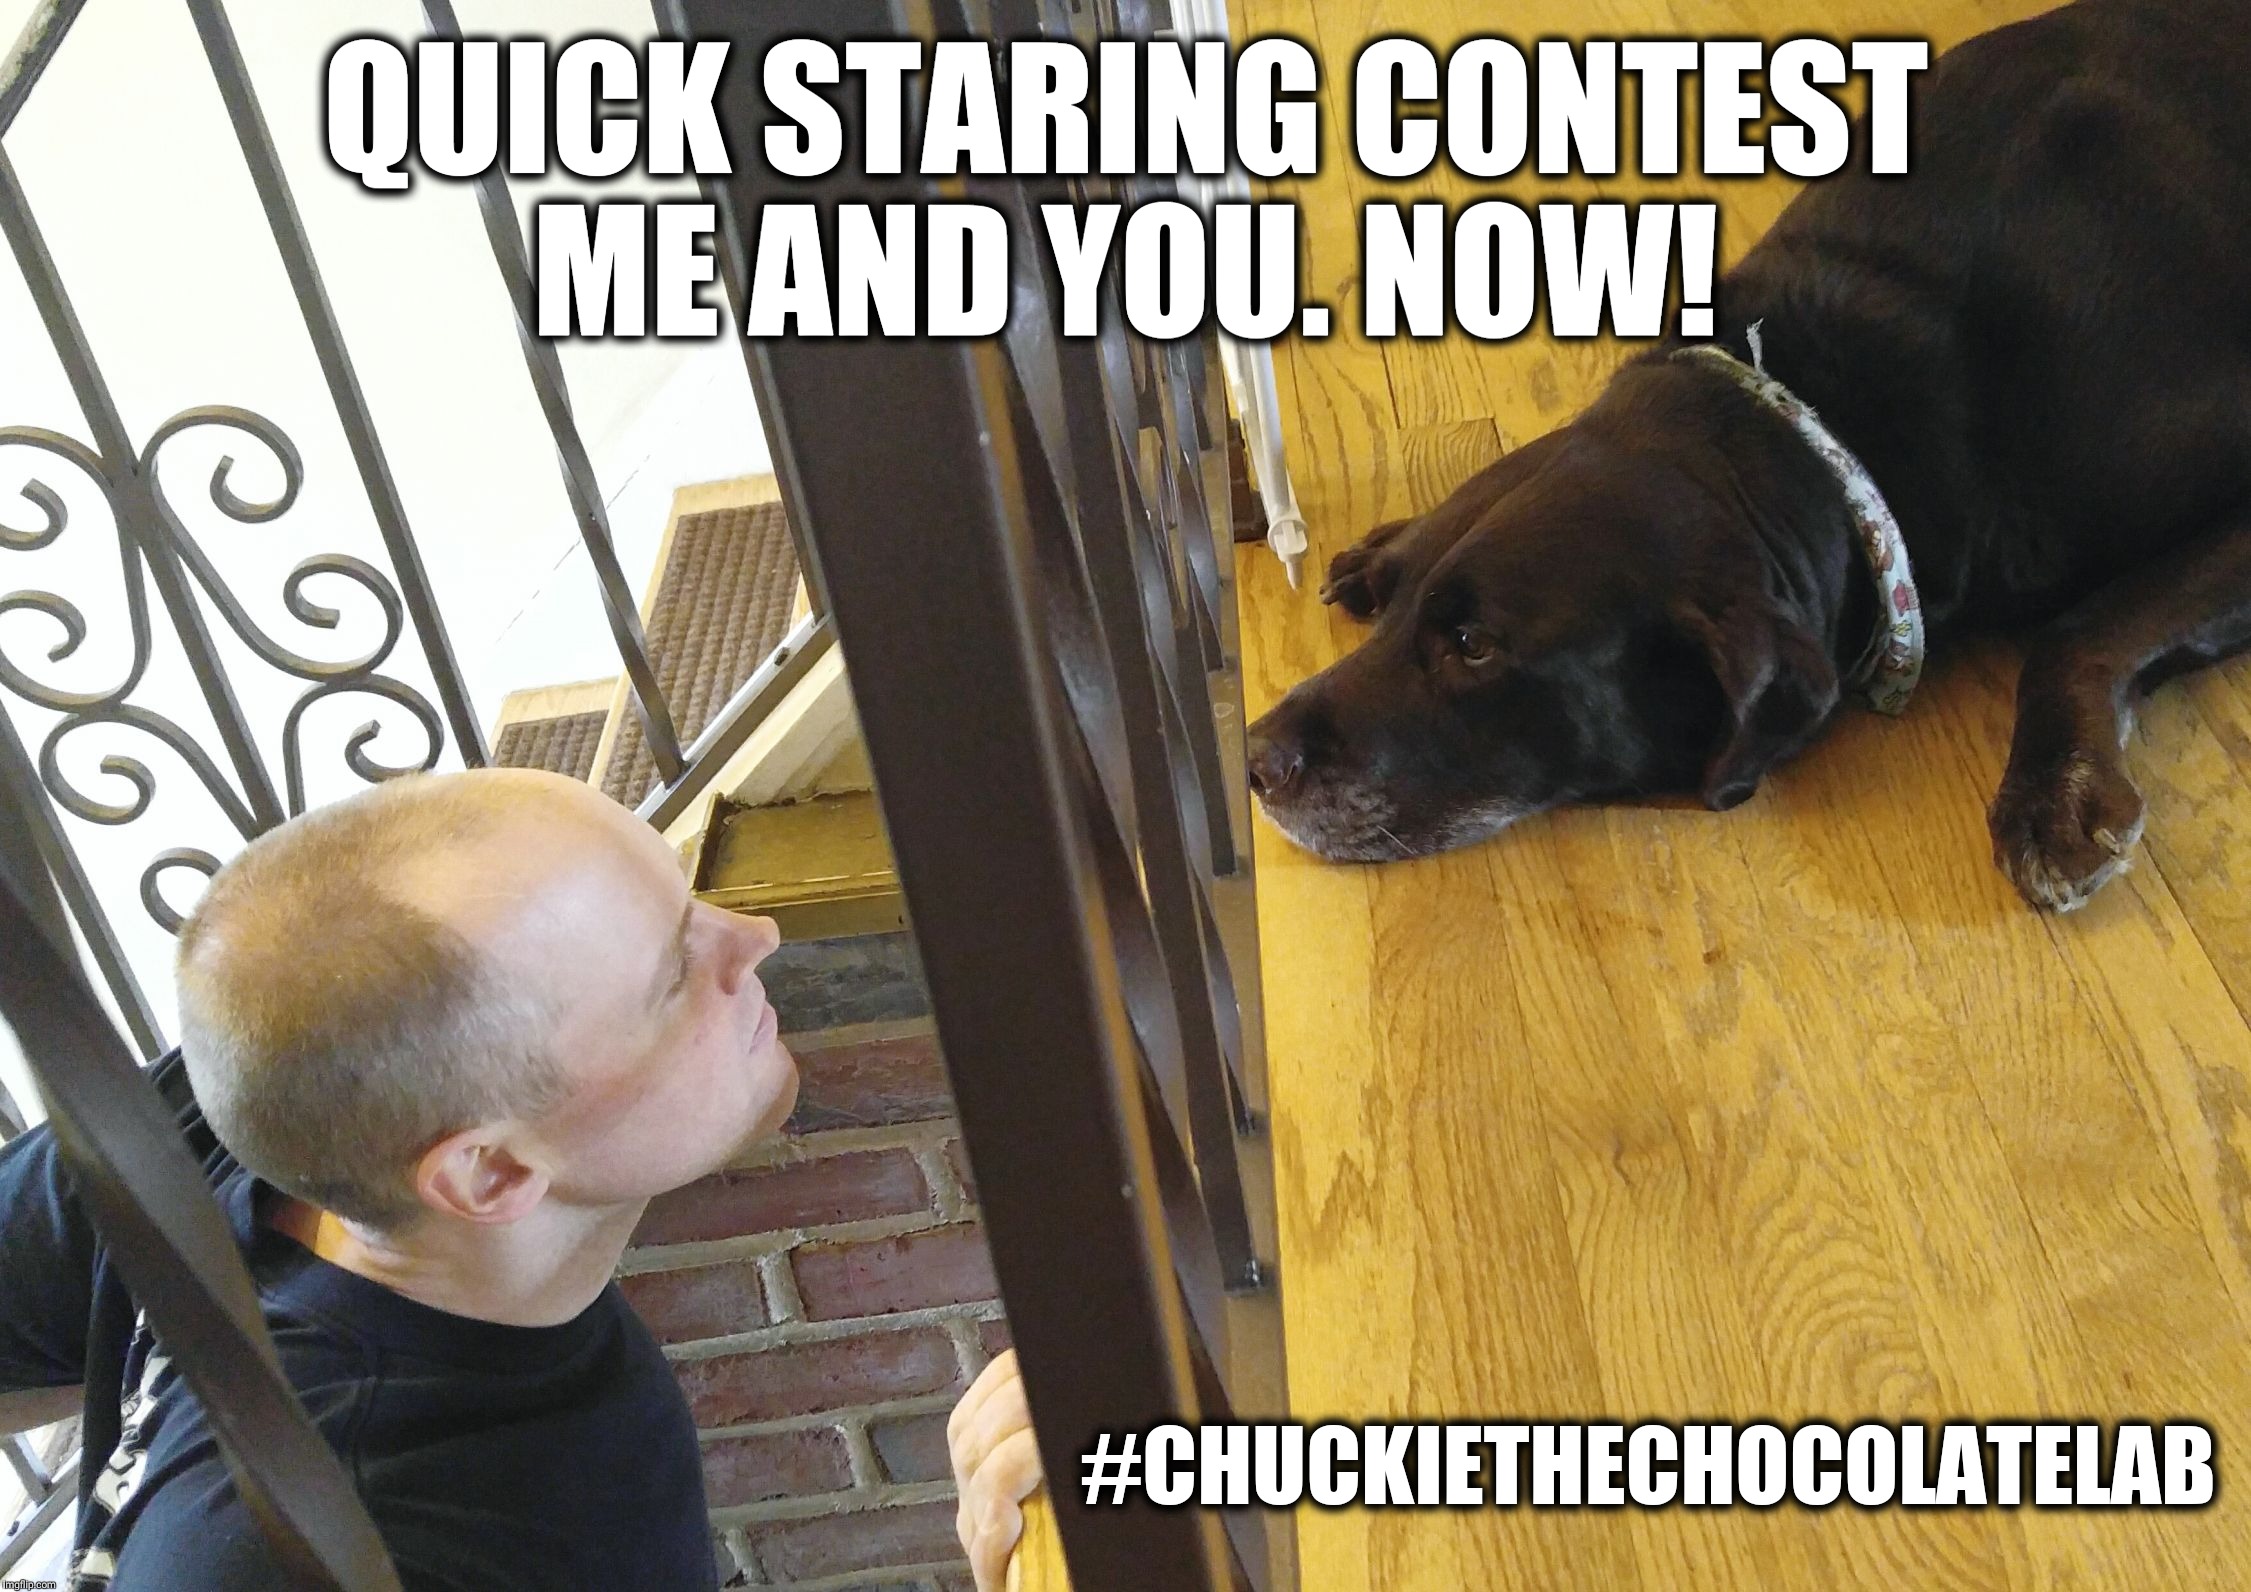 Quick staring contest me and you now | QUICK STARING CONTEST ME AND YOU. NOW! #CHUCKIETHECHOCOLATELAB | image tagged in chuckie the chocolate lab teamchuckie,staring contest,dogs,funny,memes,me and you | made w/ Imgflip meme maker